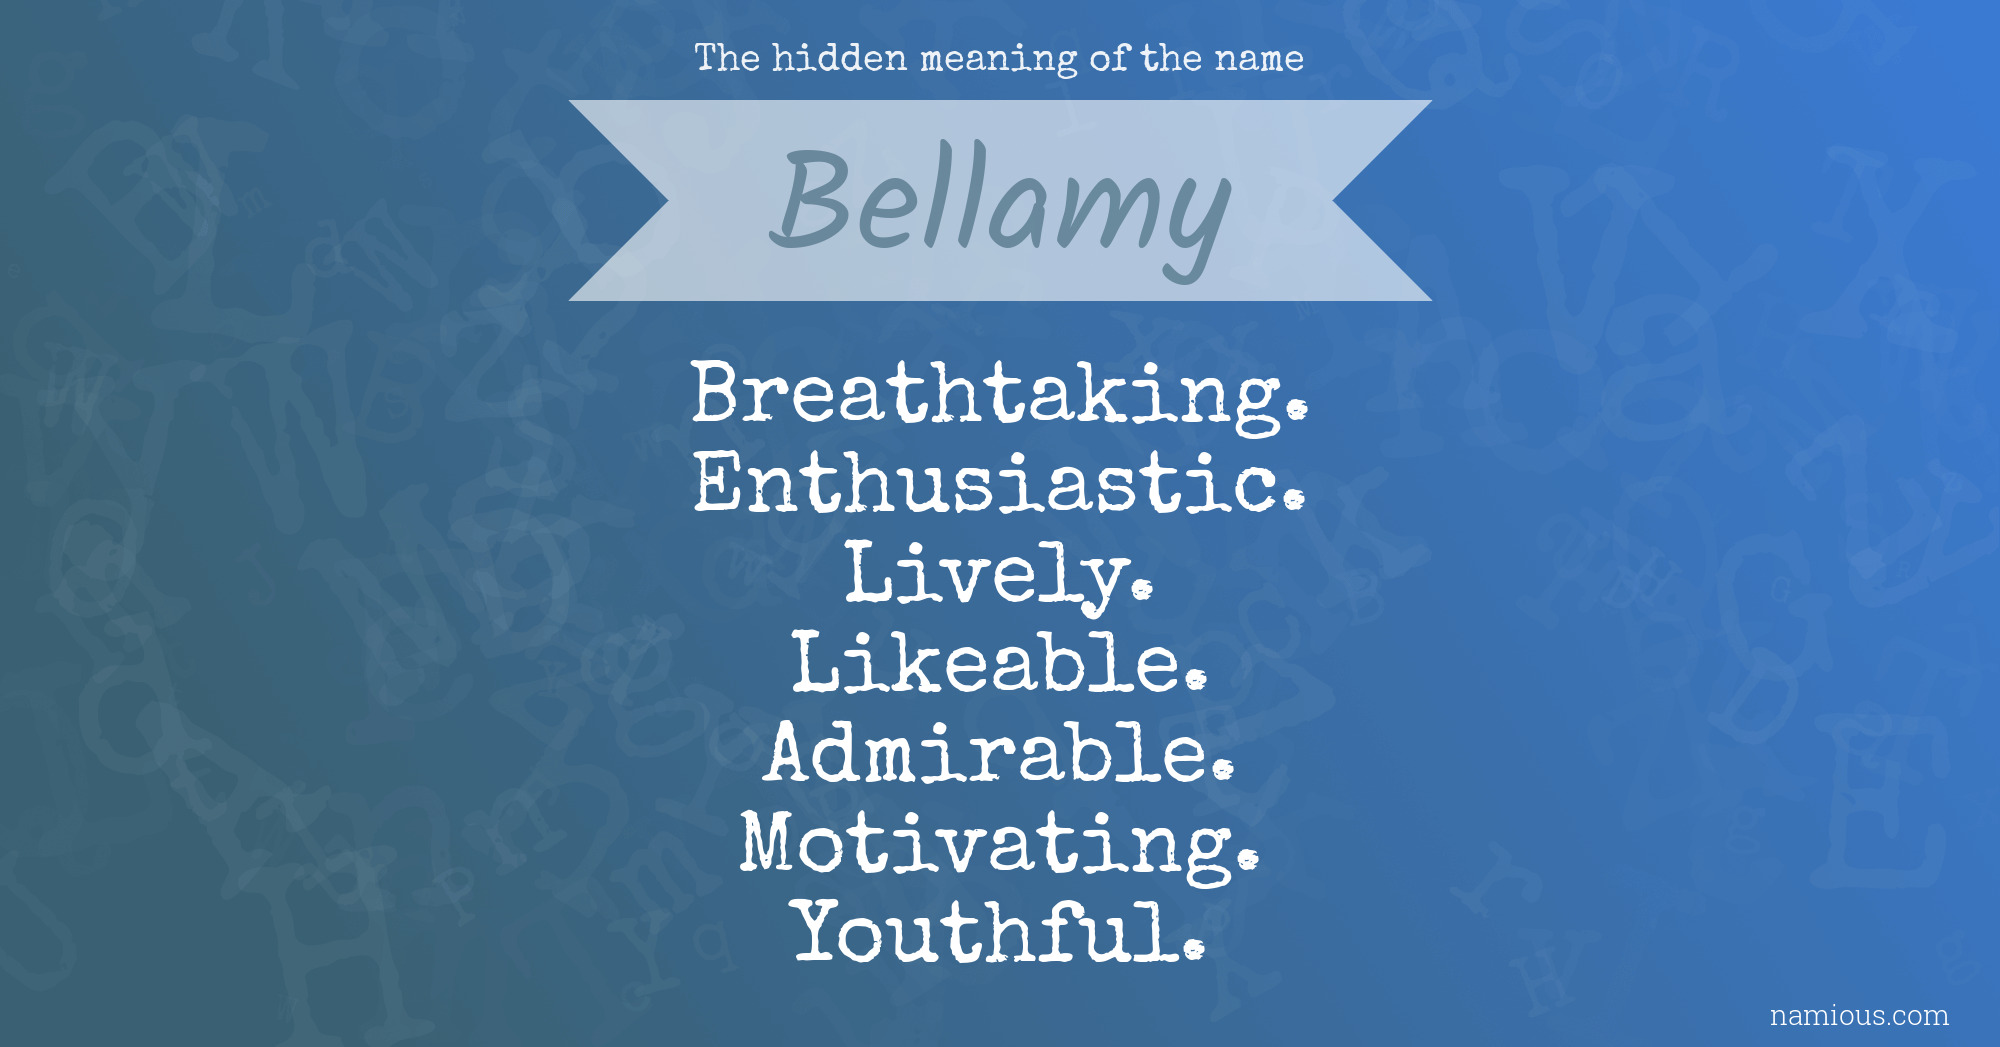 The hidden meaning of the name Bellamy